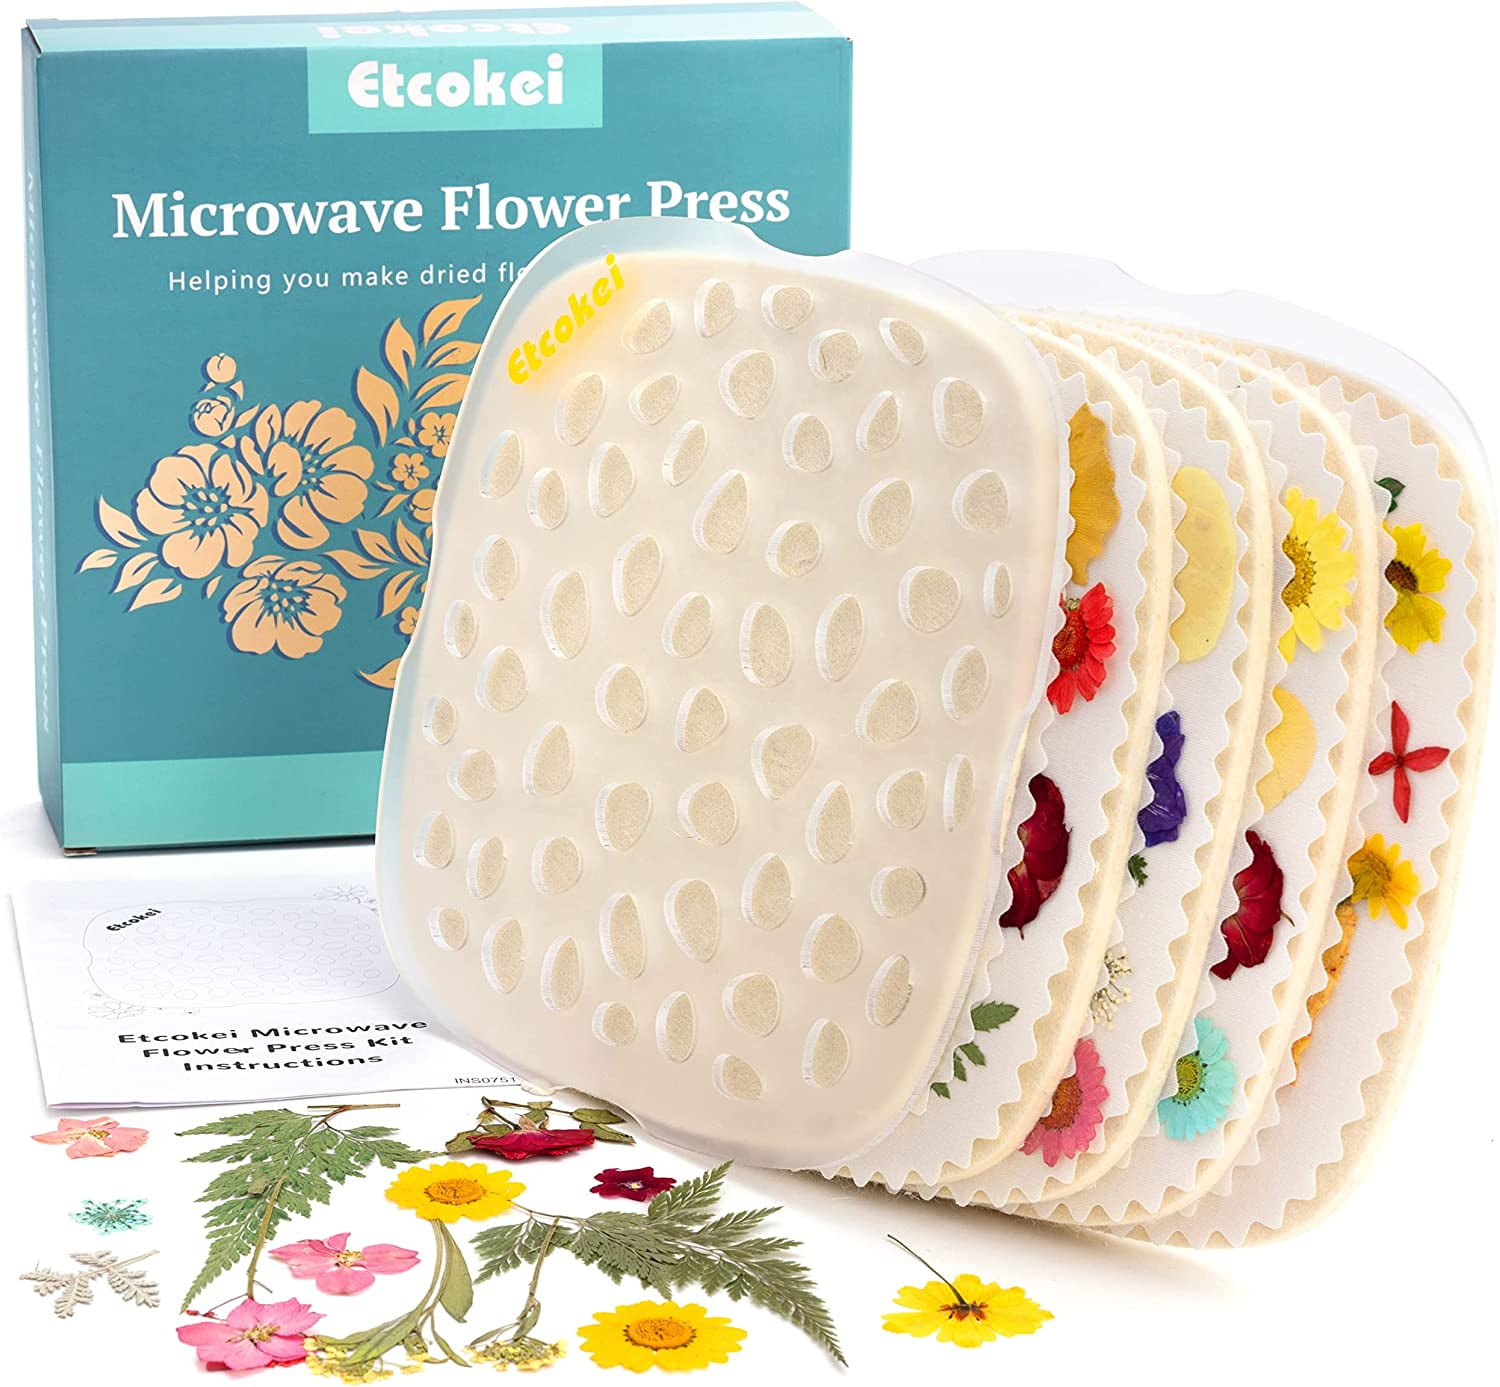 Quickly Microwave Flower Press Kit, 4 Layers 7.5 Flower Pressing